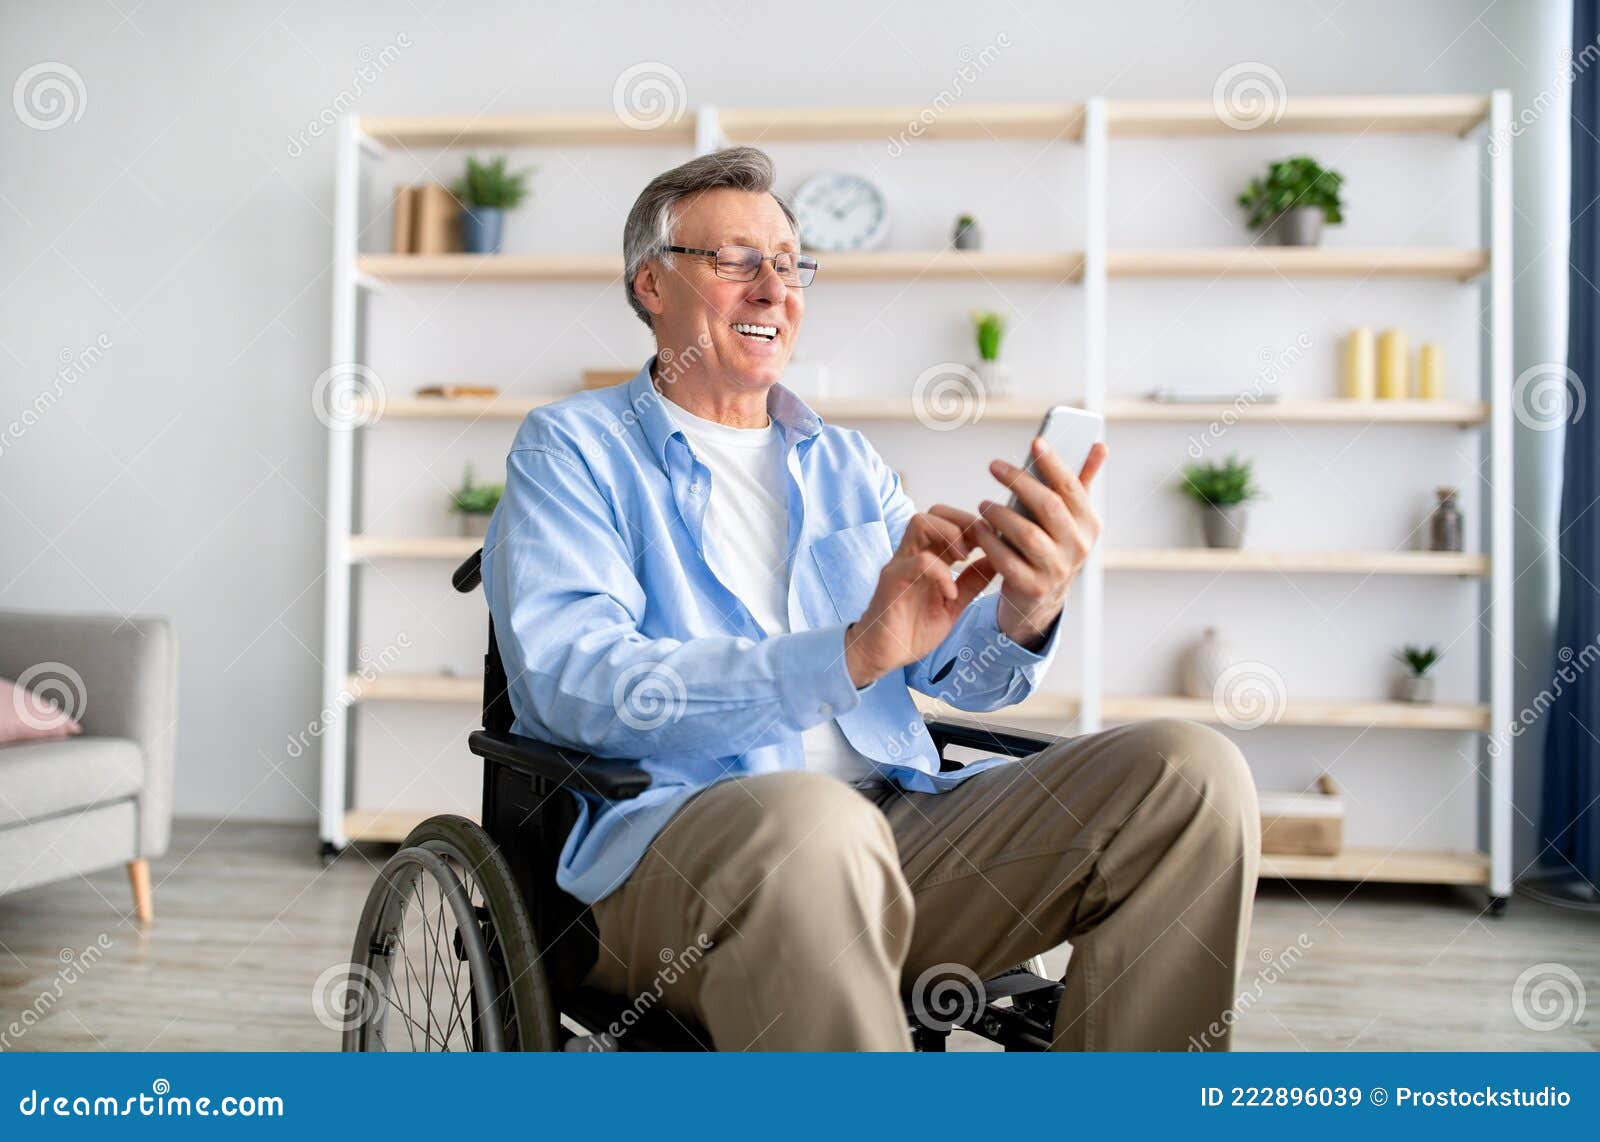 happy-disabled-older-man-wheelchair-using-cellphone-browsing-web-watching-movie-retirement-home-handicapped-senior-male-222896039.jpg